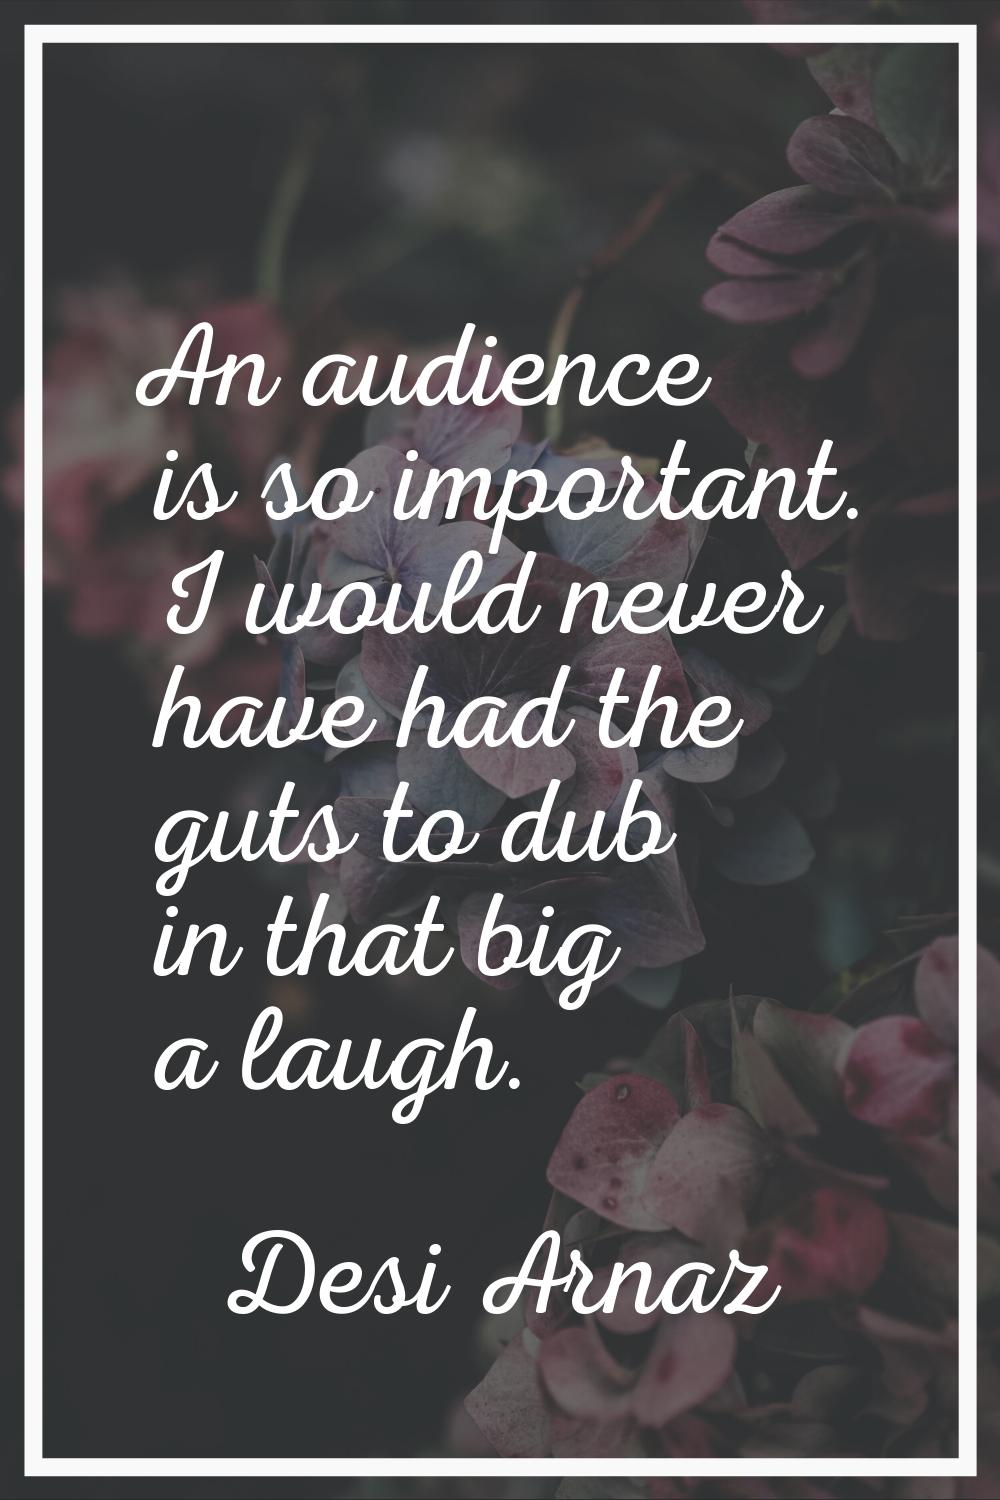 An audience is so important. I would never have had the guts to dub in that big a laugh.